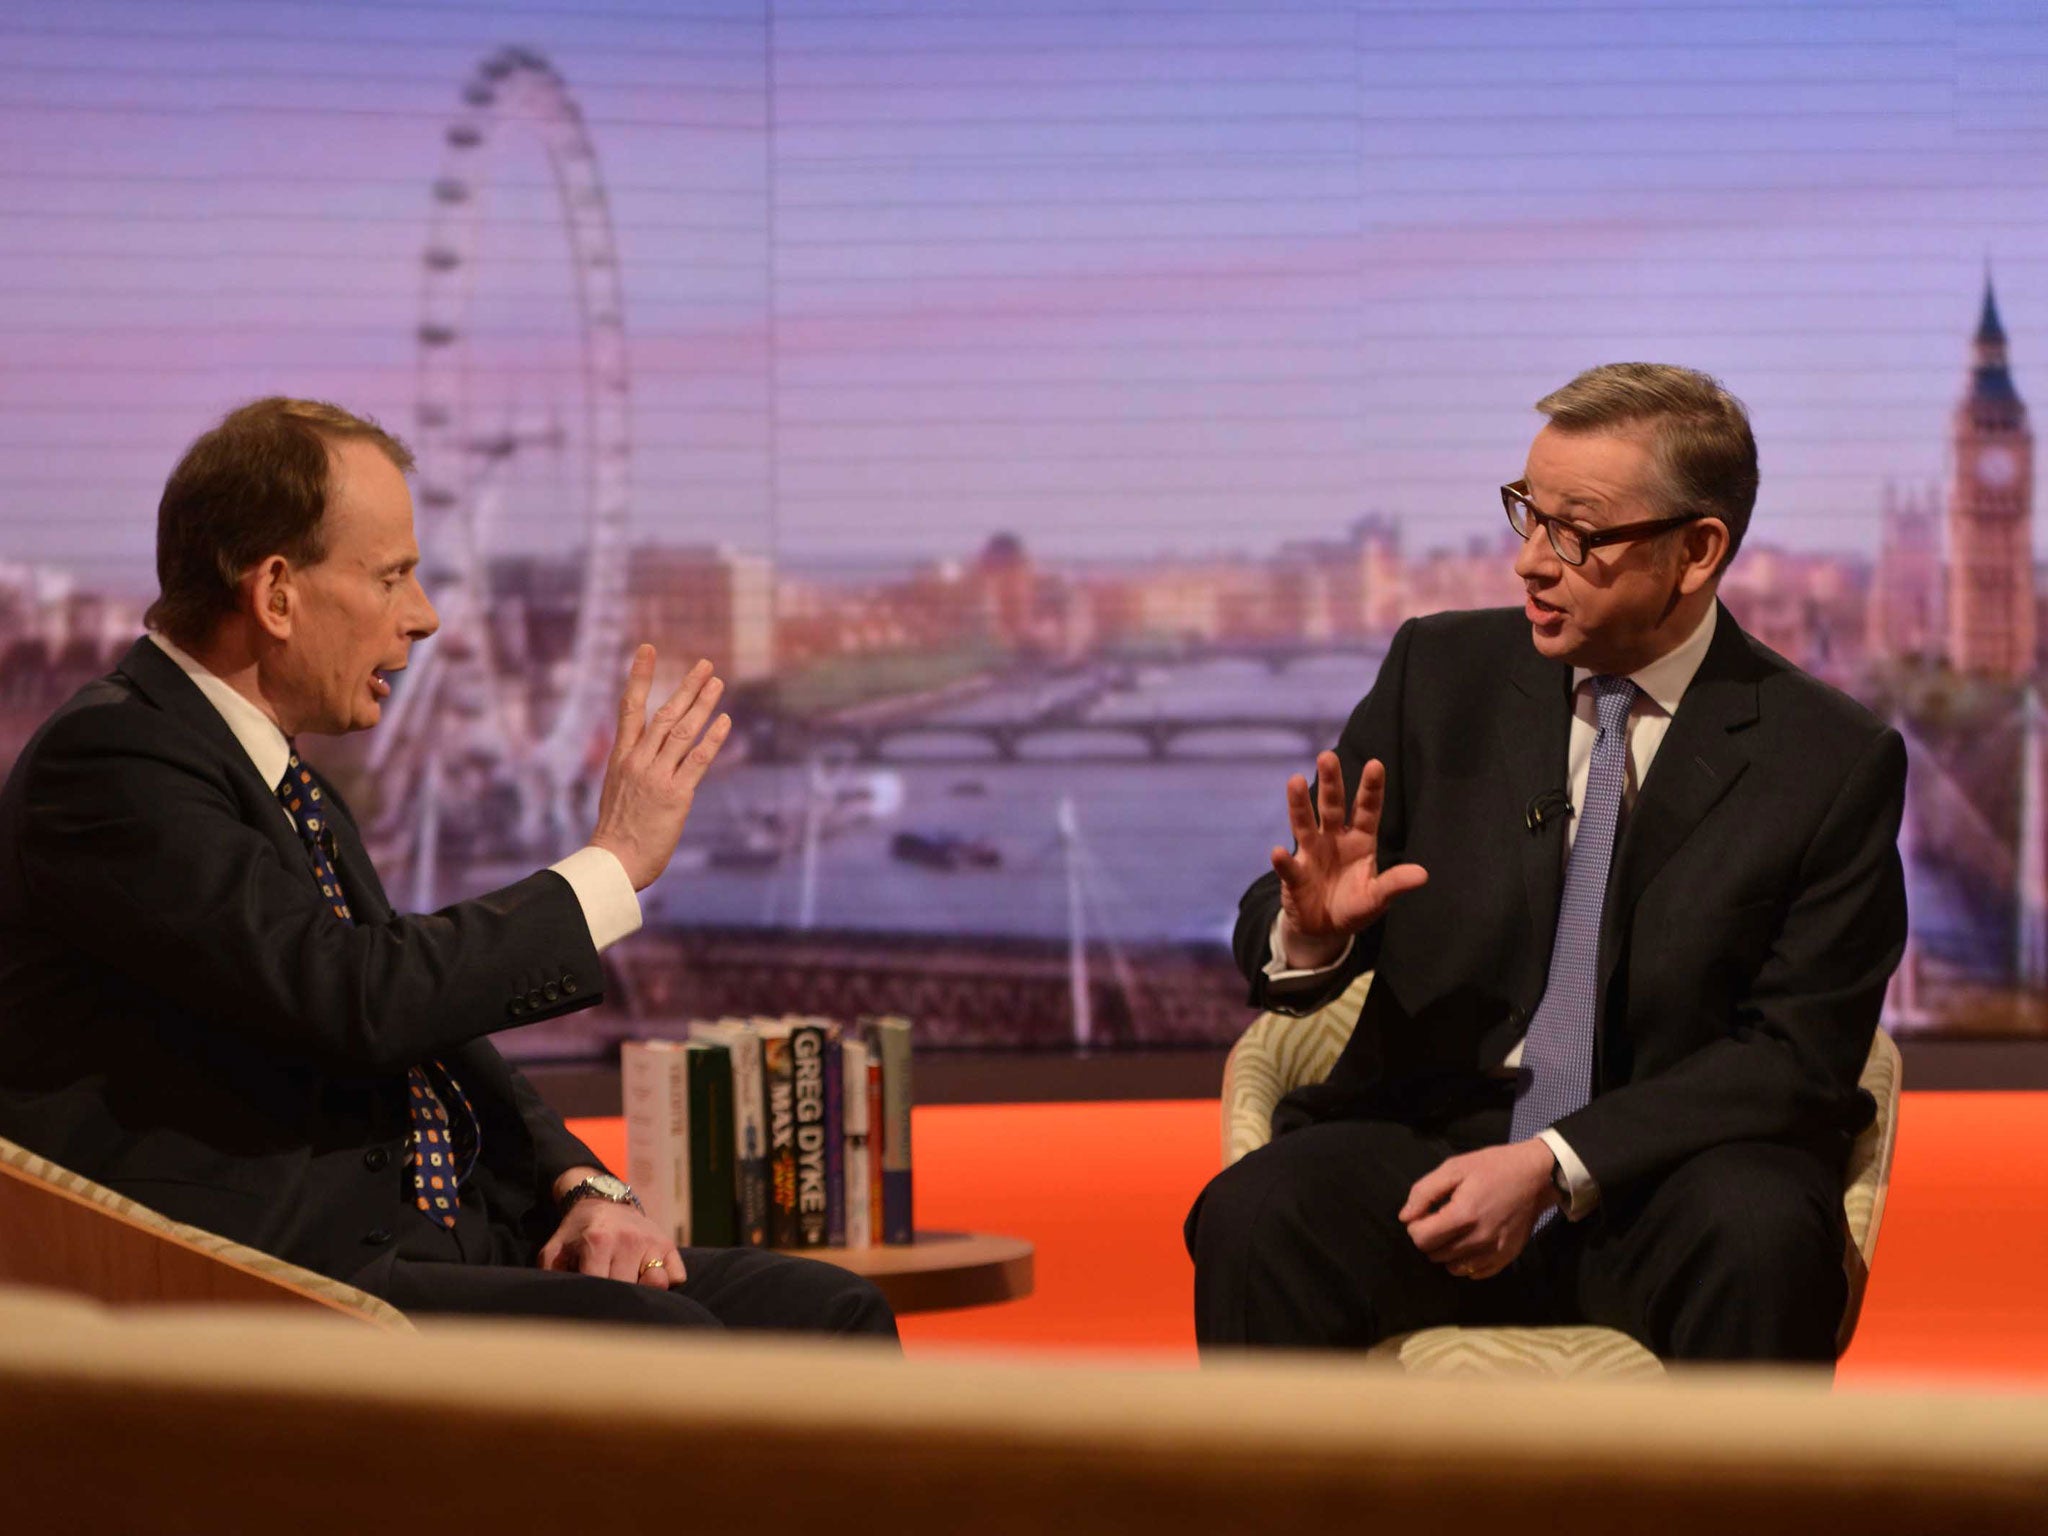 Michael Gove tells Andrew Marr that Lady Morgan was not removed for political reasons